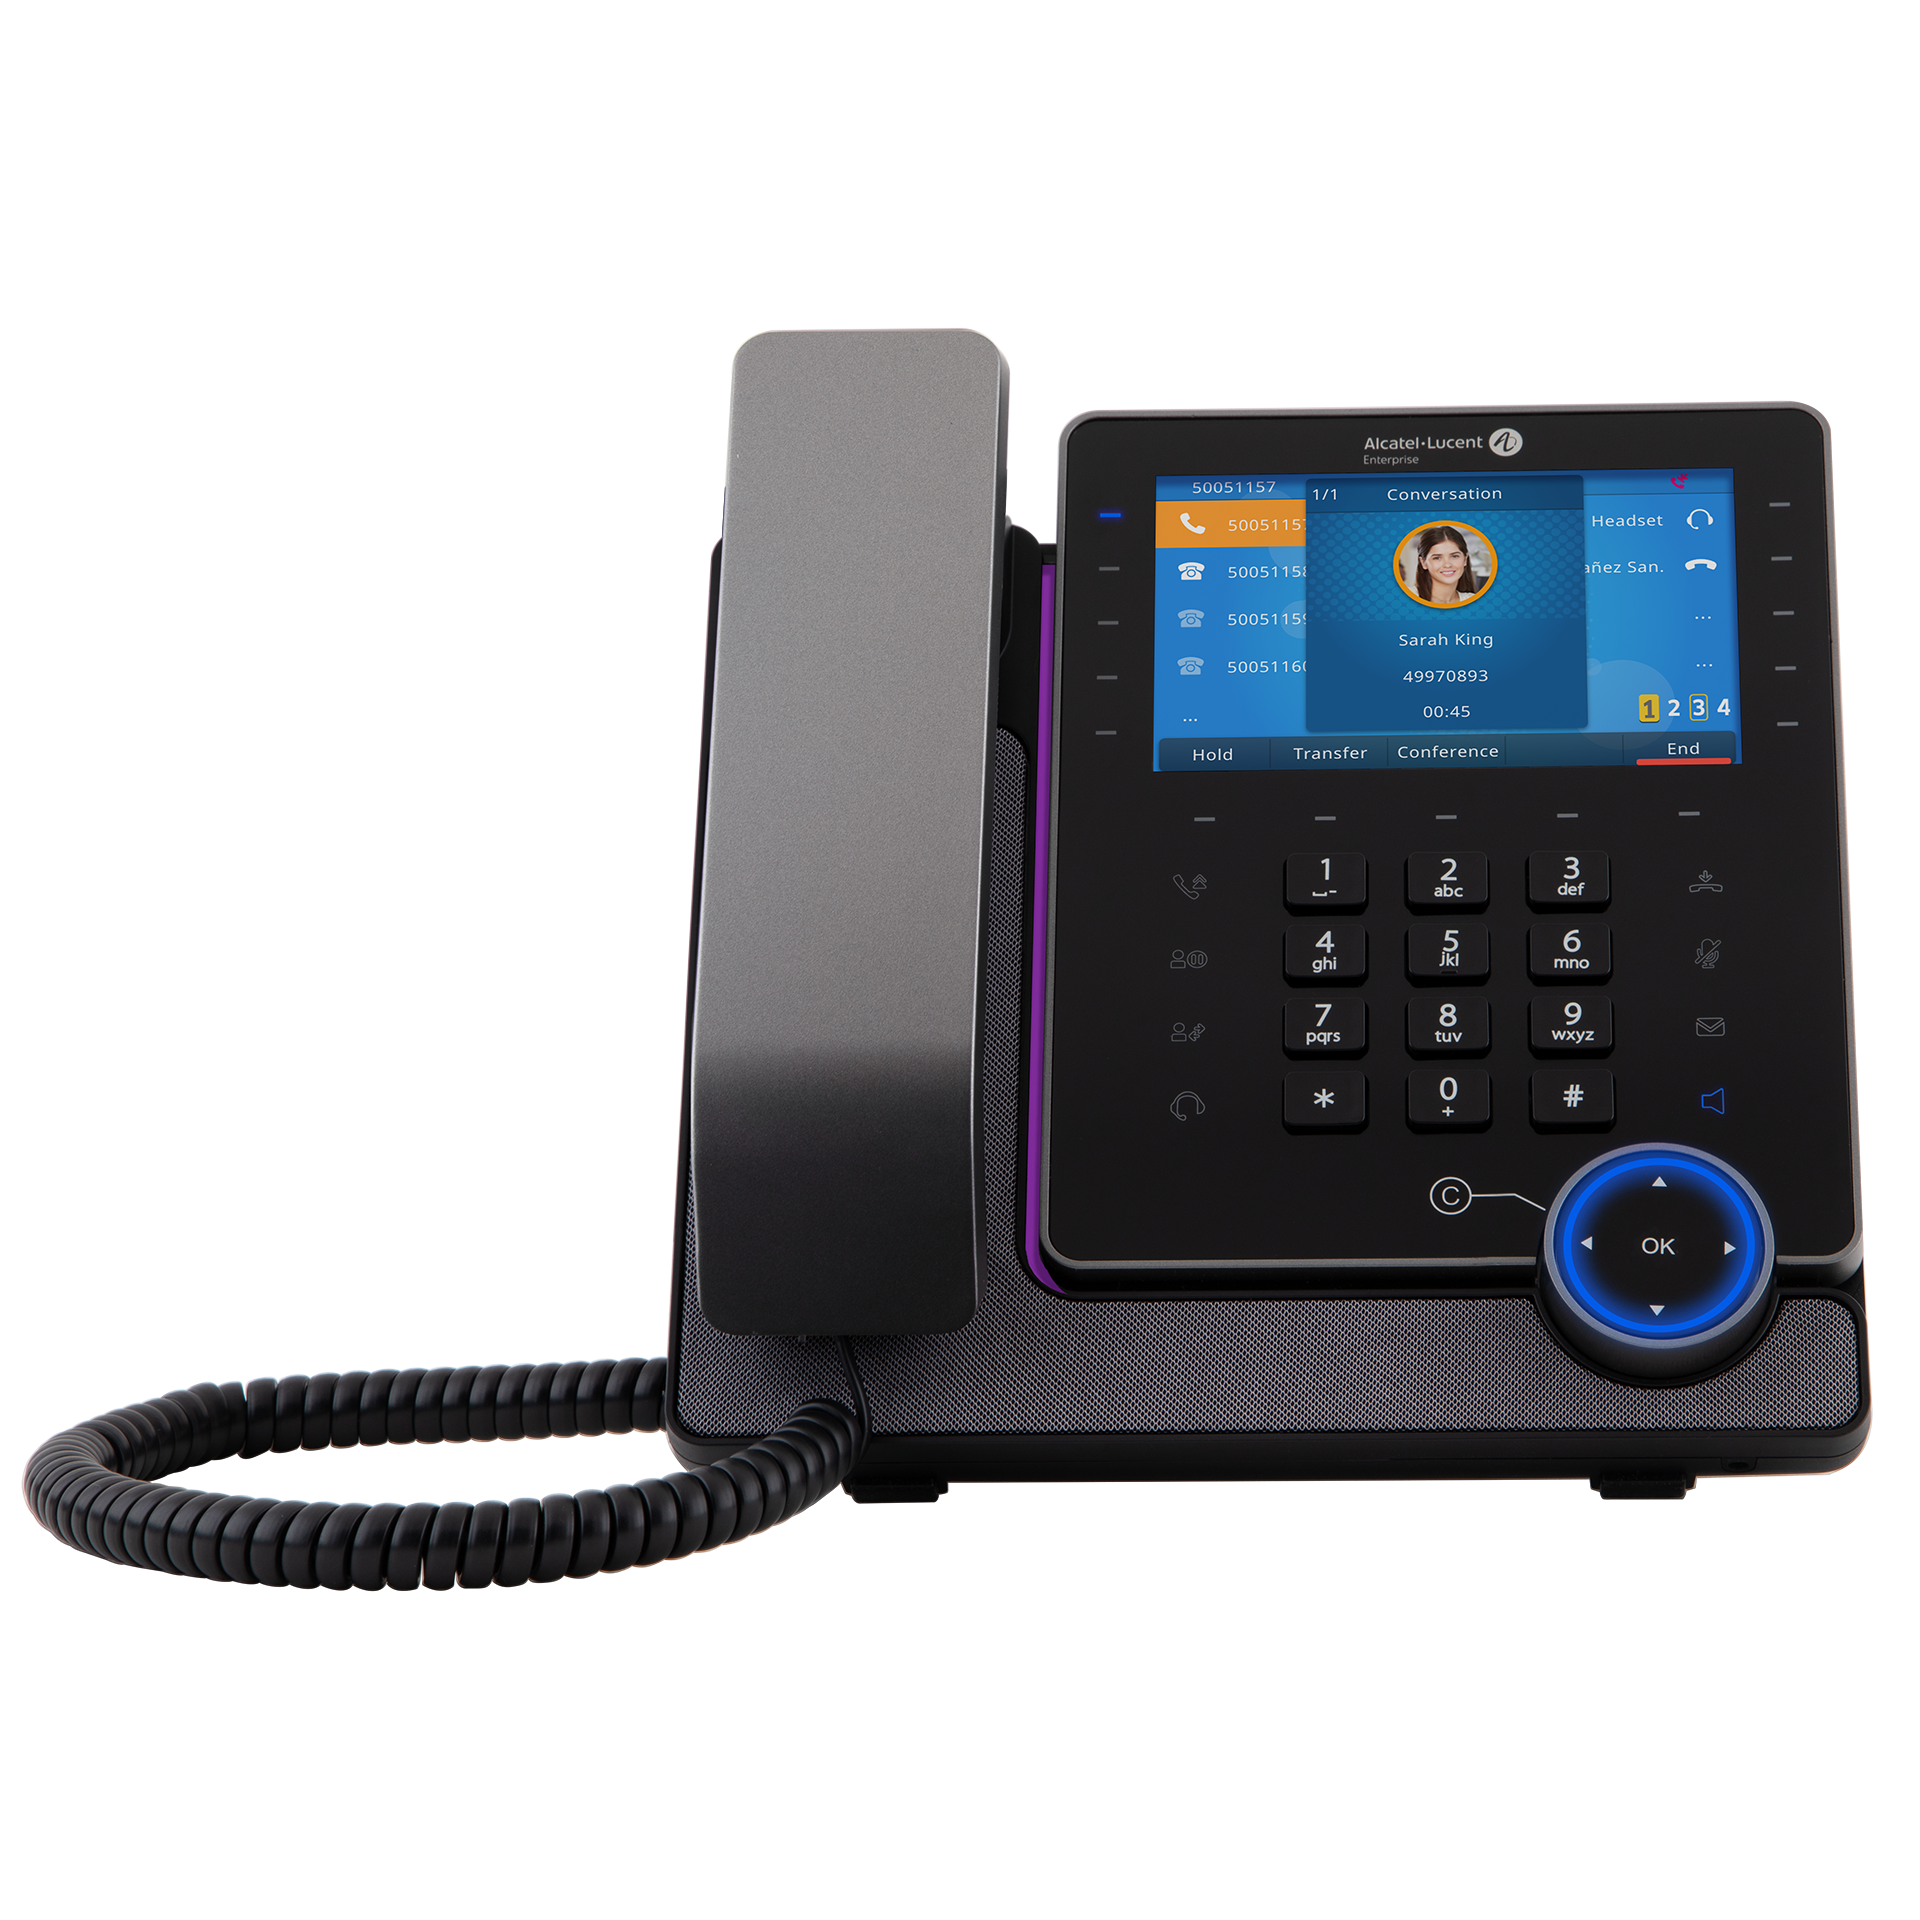 Alcater-lucent Superwideband Handfree 5" 800x480 color display M8 DESKPHONE